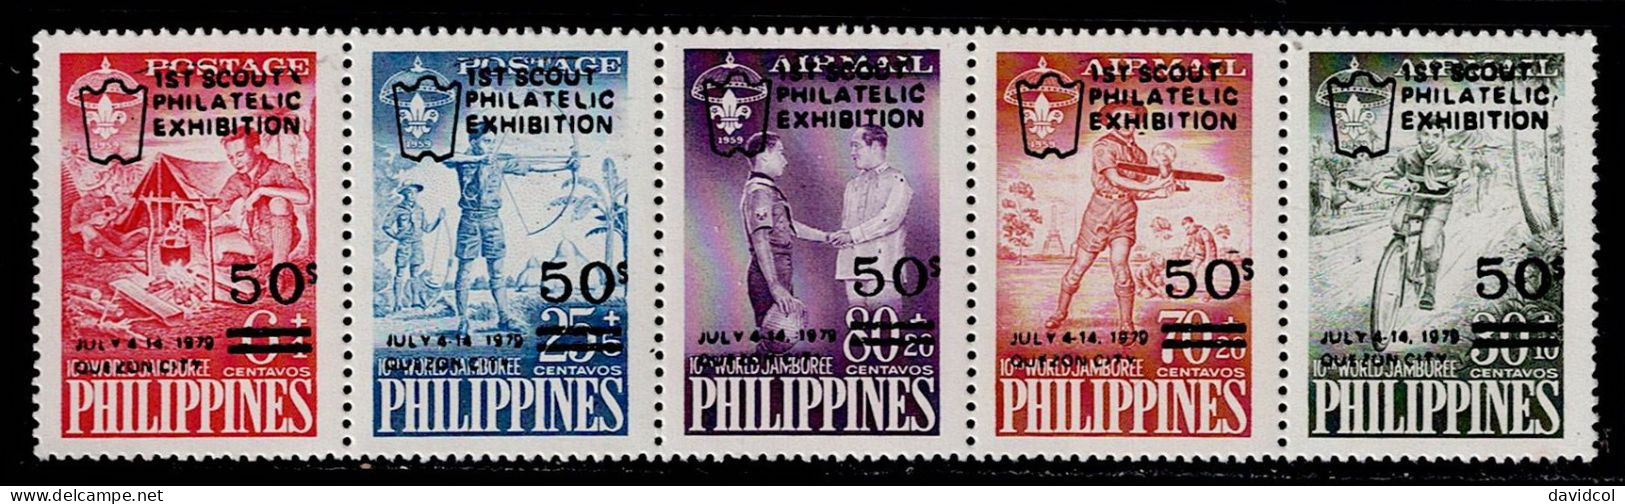 FIL-02- PHILIPPINES - 1979 - MNH -SCOUTS- STRIP - 1ST SCOUT PHILATELIC EXHIBITION - Philippines